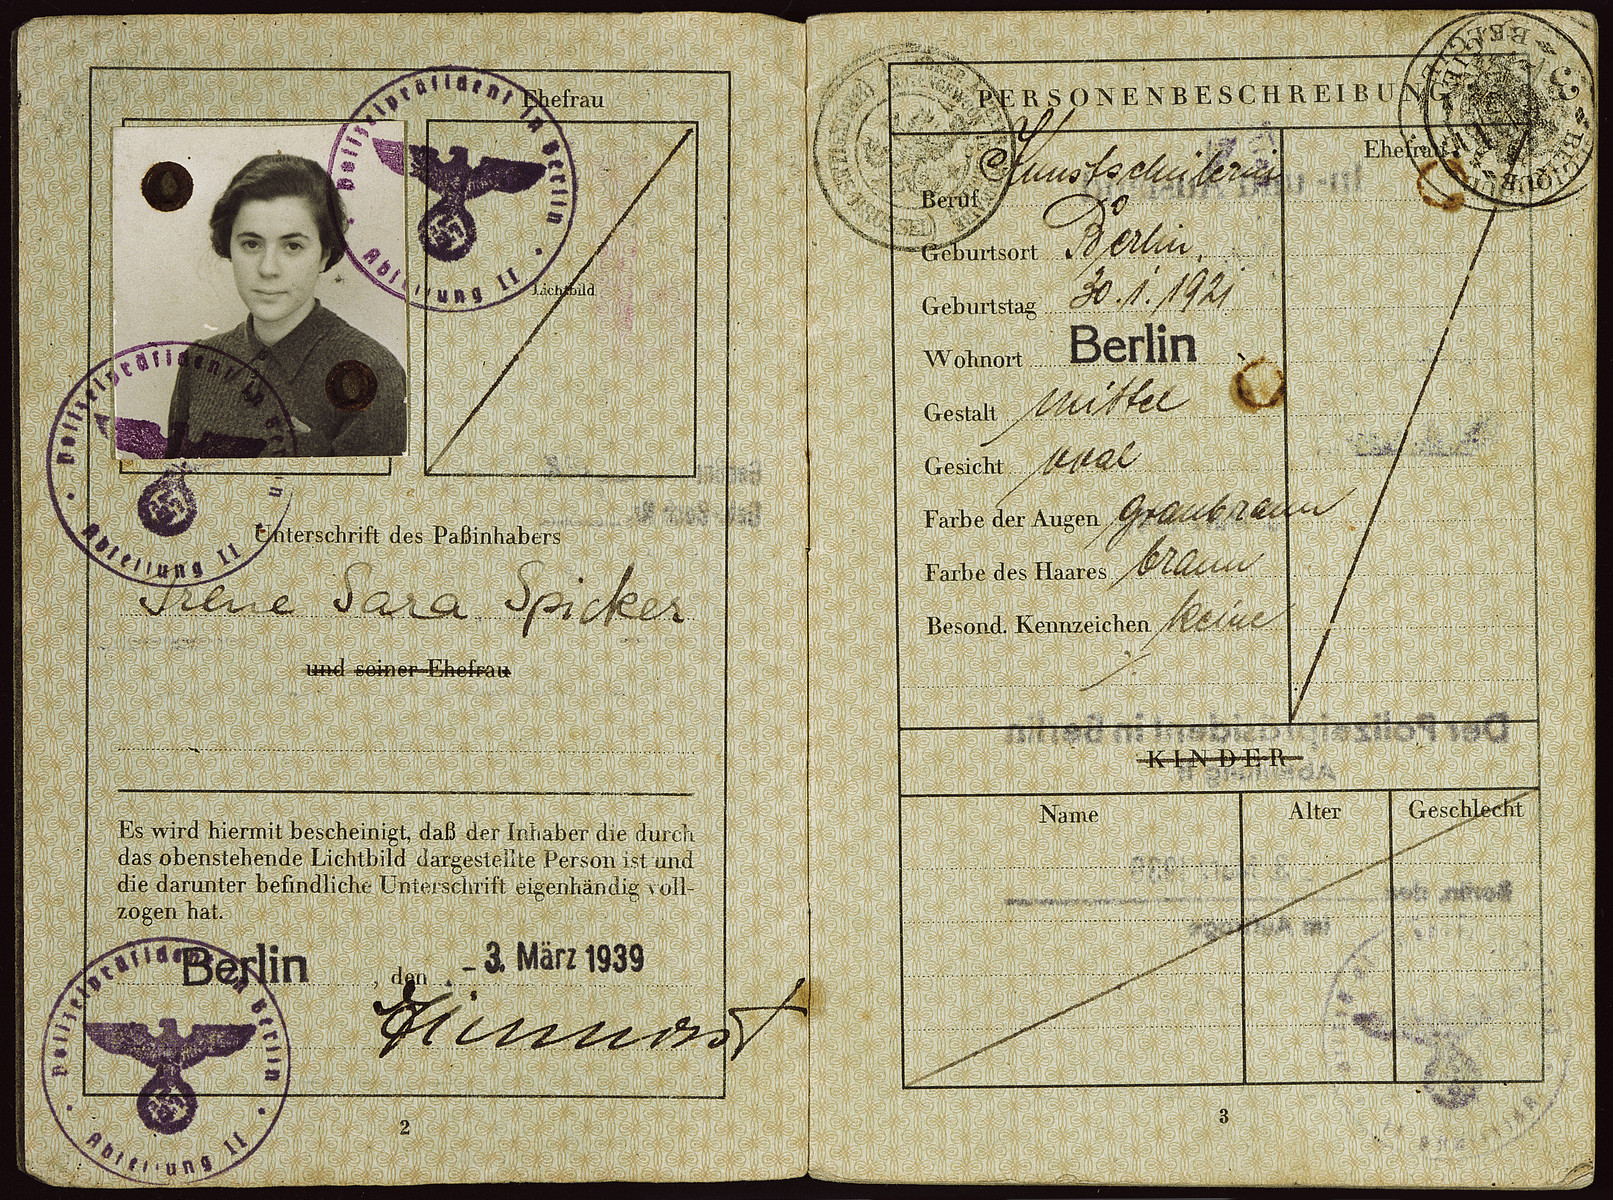 Passport issued to Irene Spicker in March 1939 stamped with the Nazi eagle and displaying the imposed middle name of "Sara".